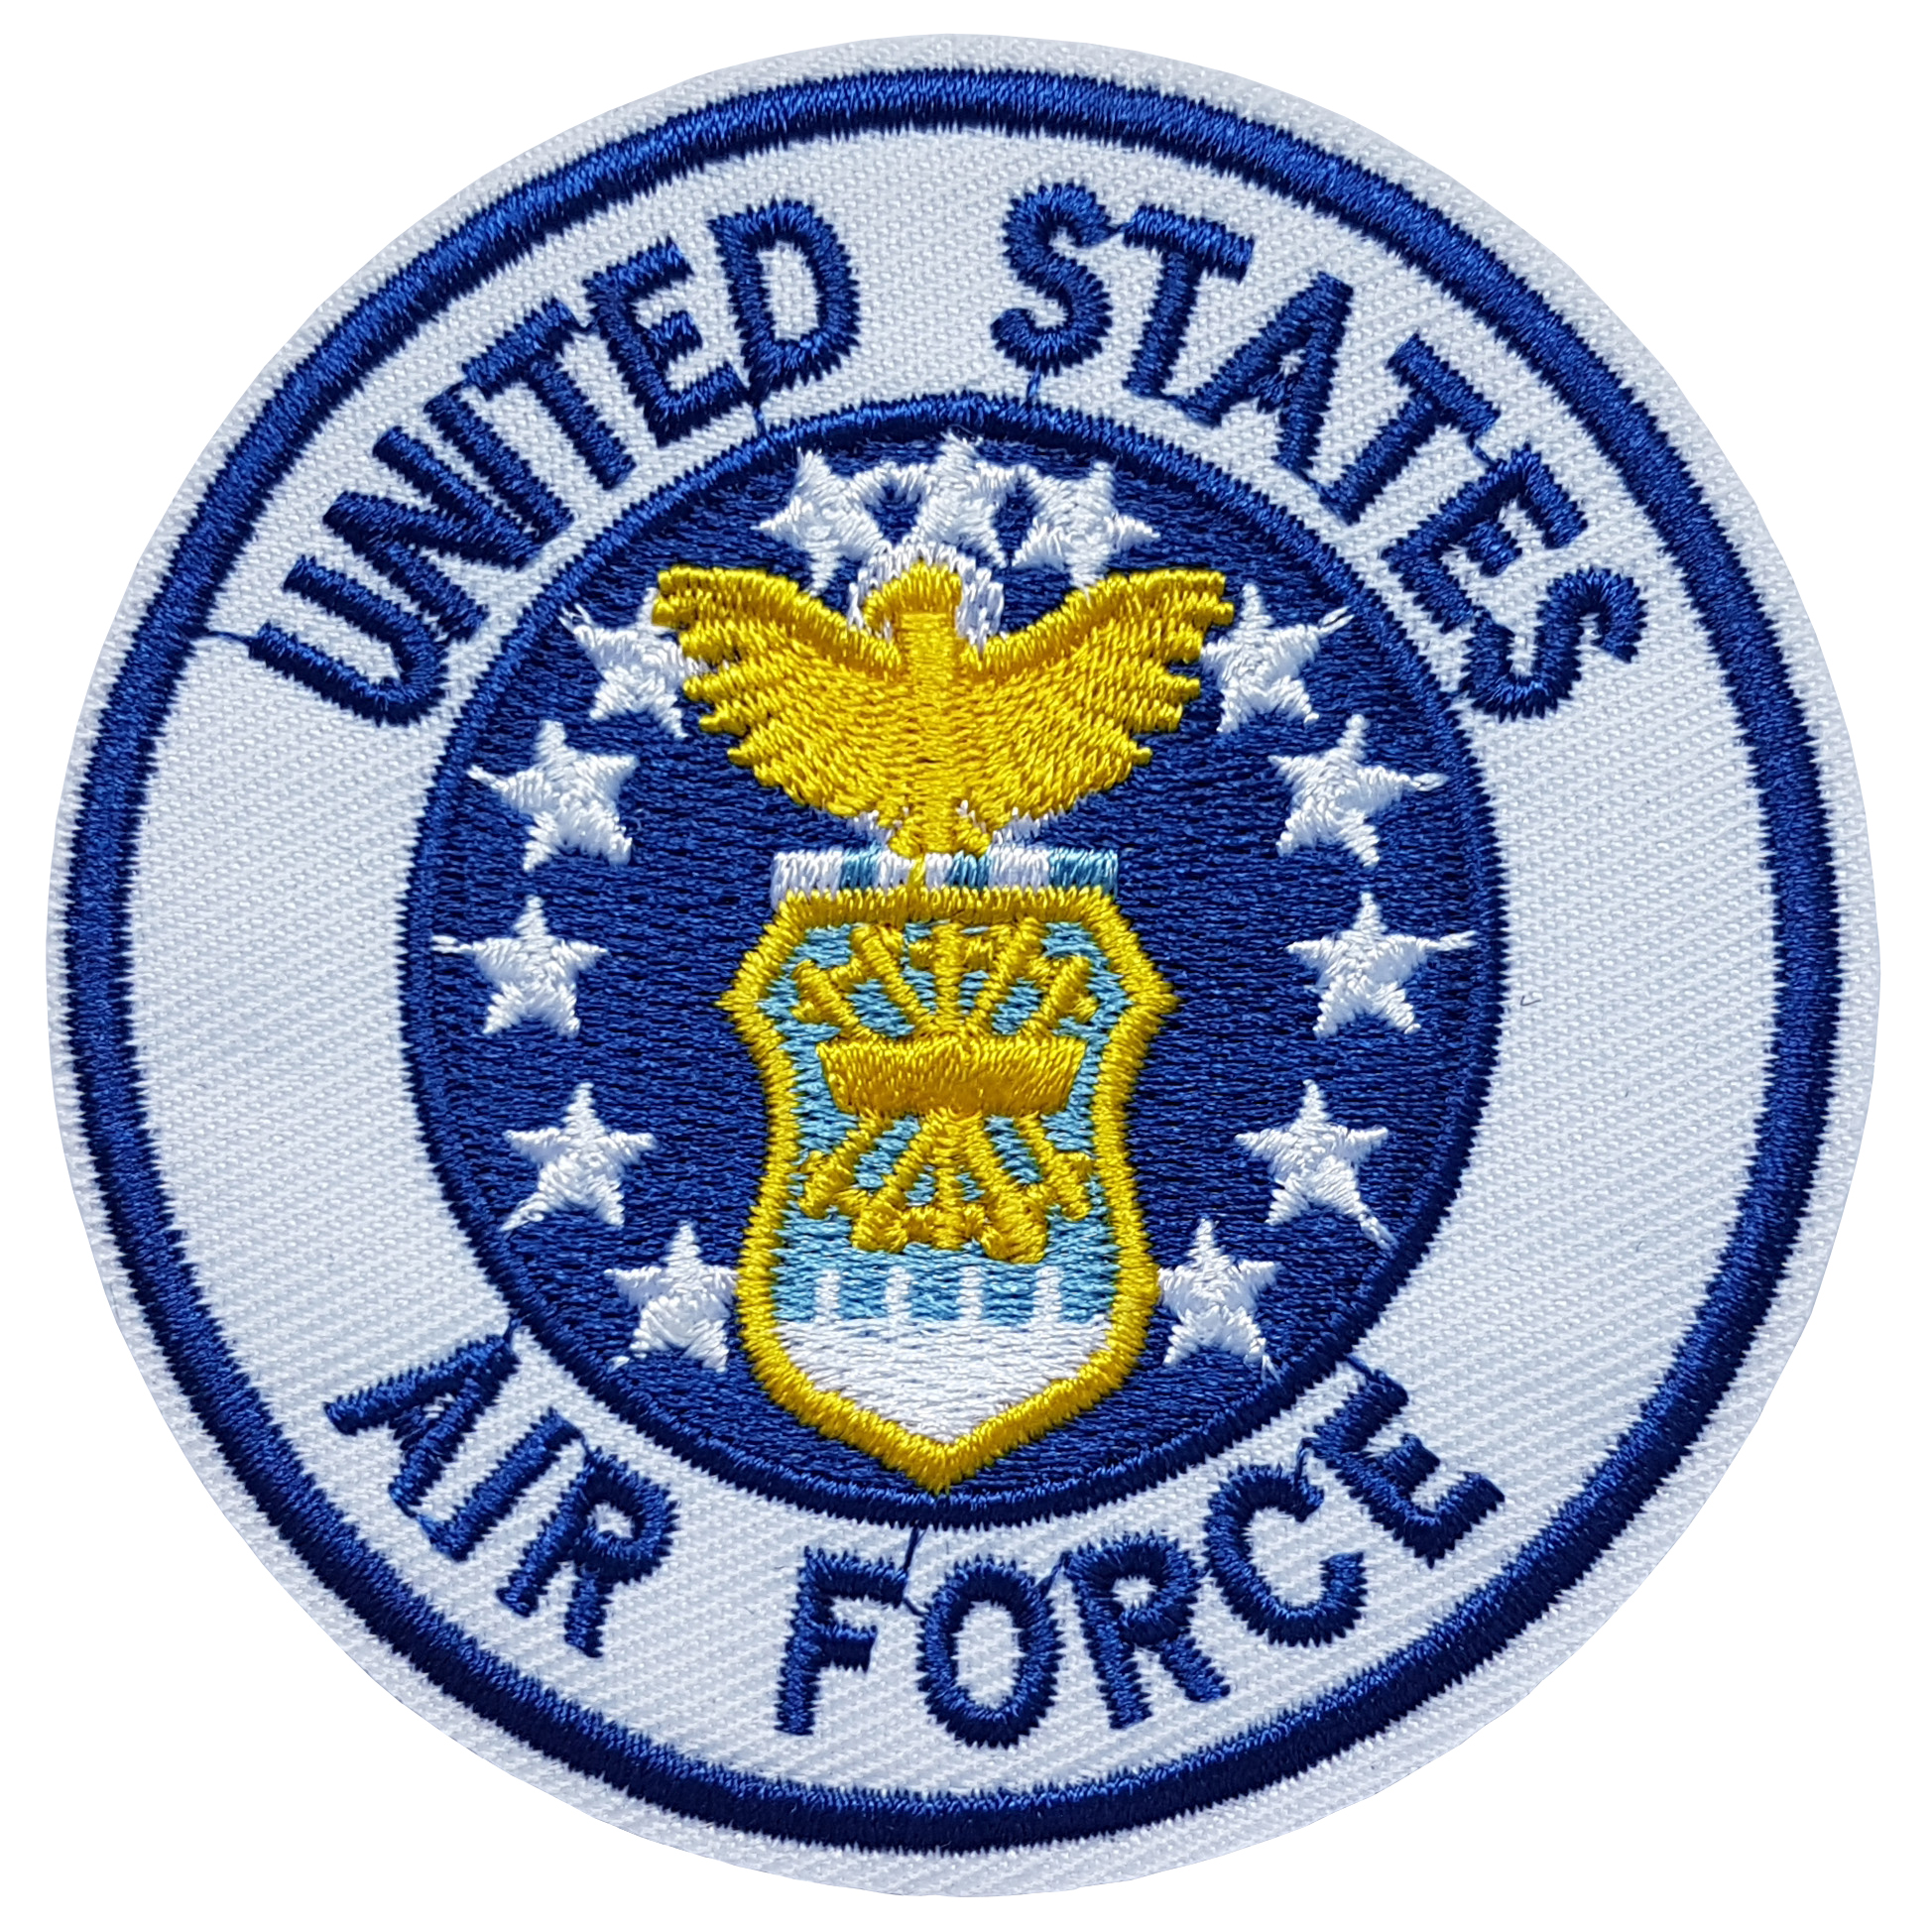 Patch Thermocollant United States Air Force Armée Miltaire